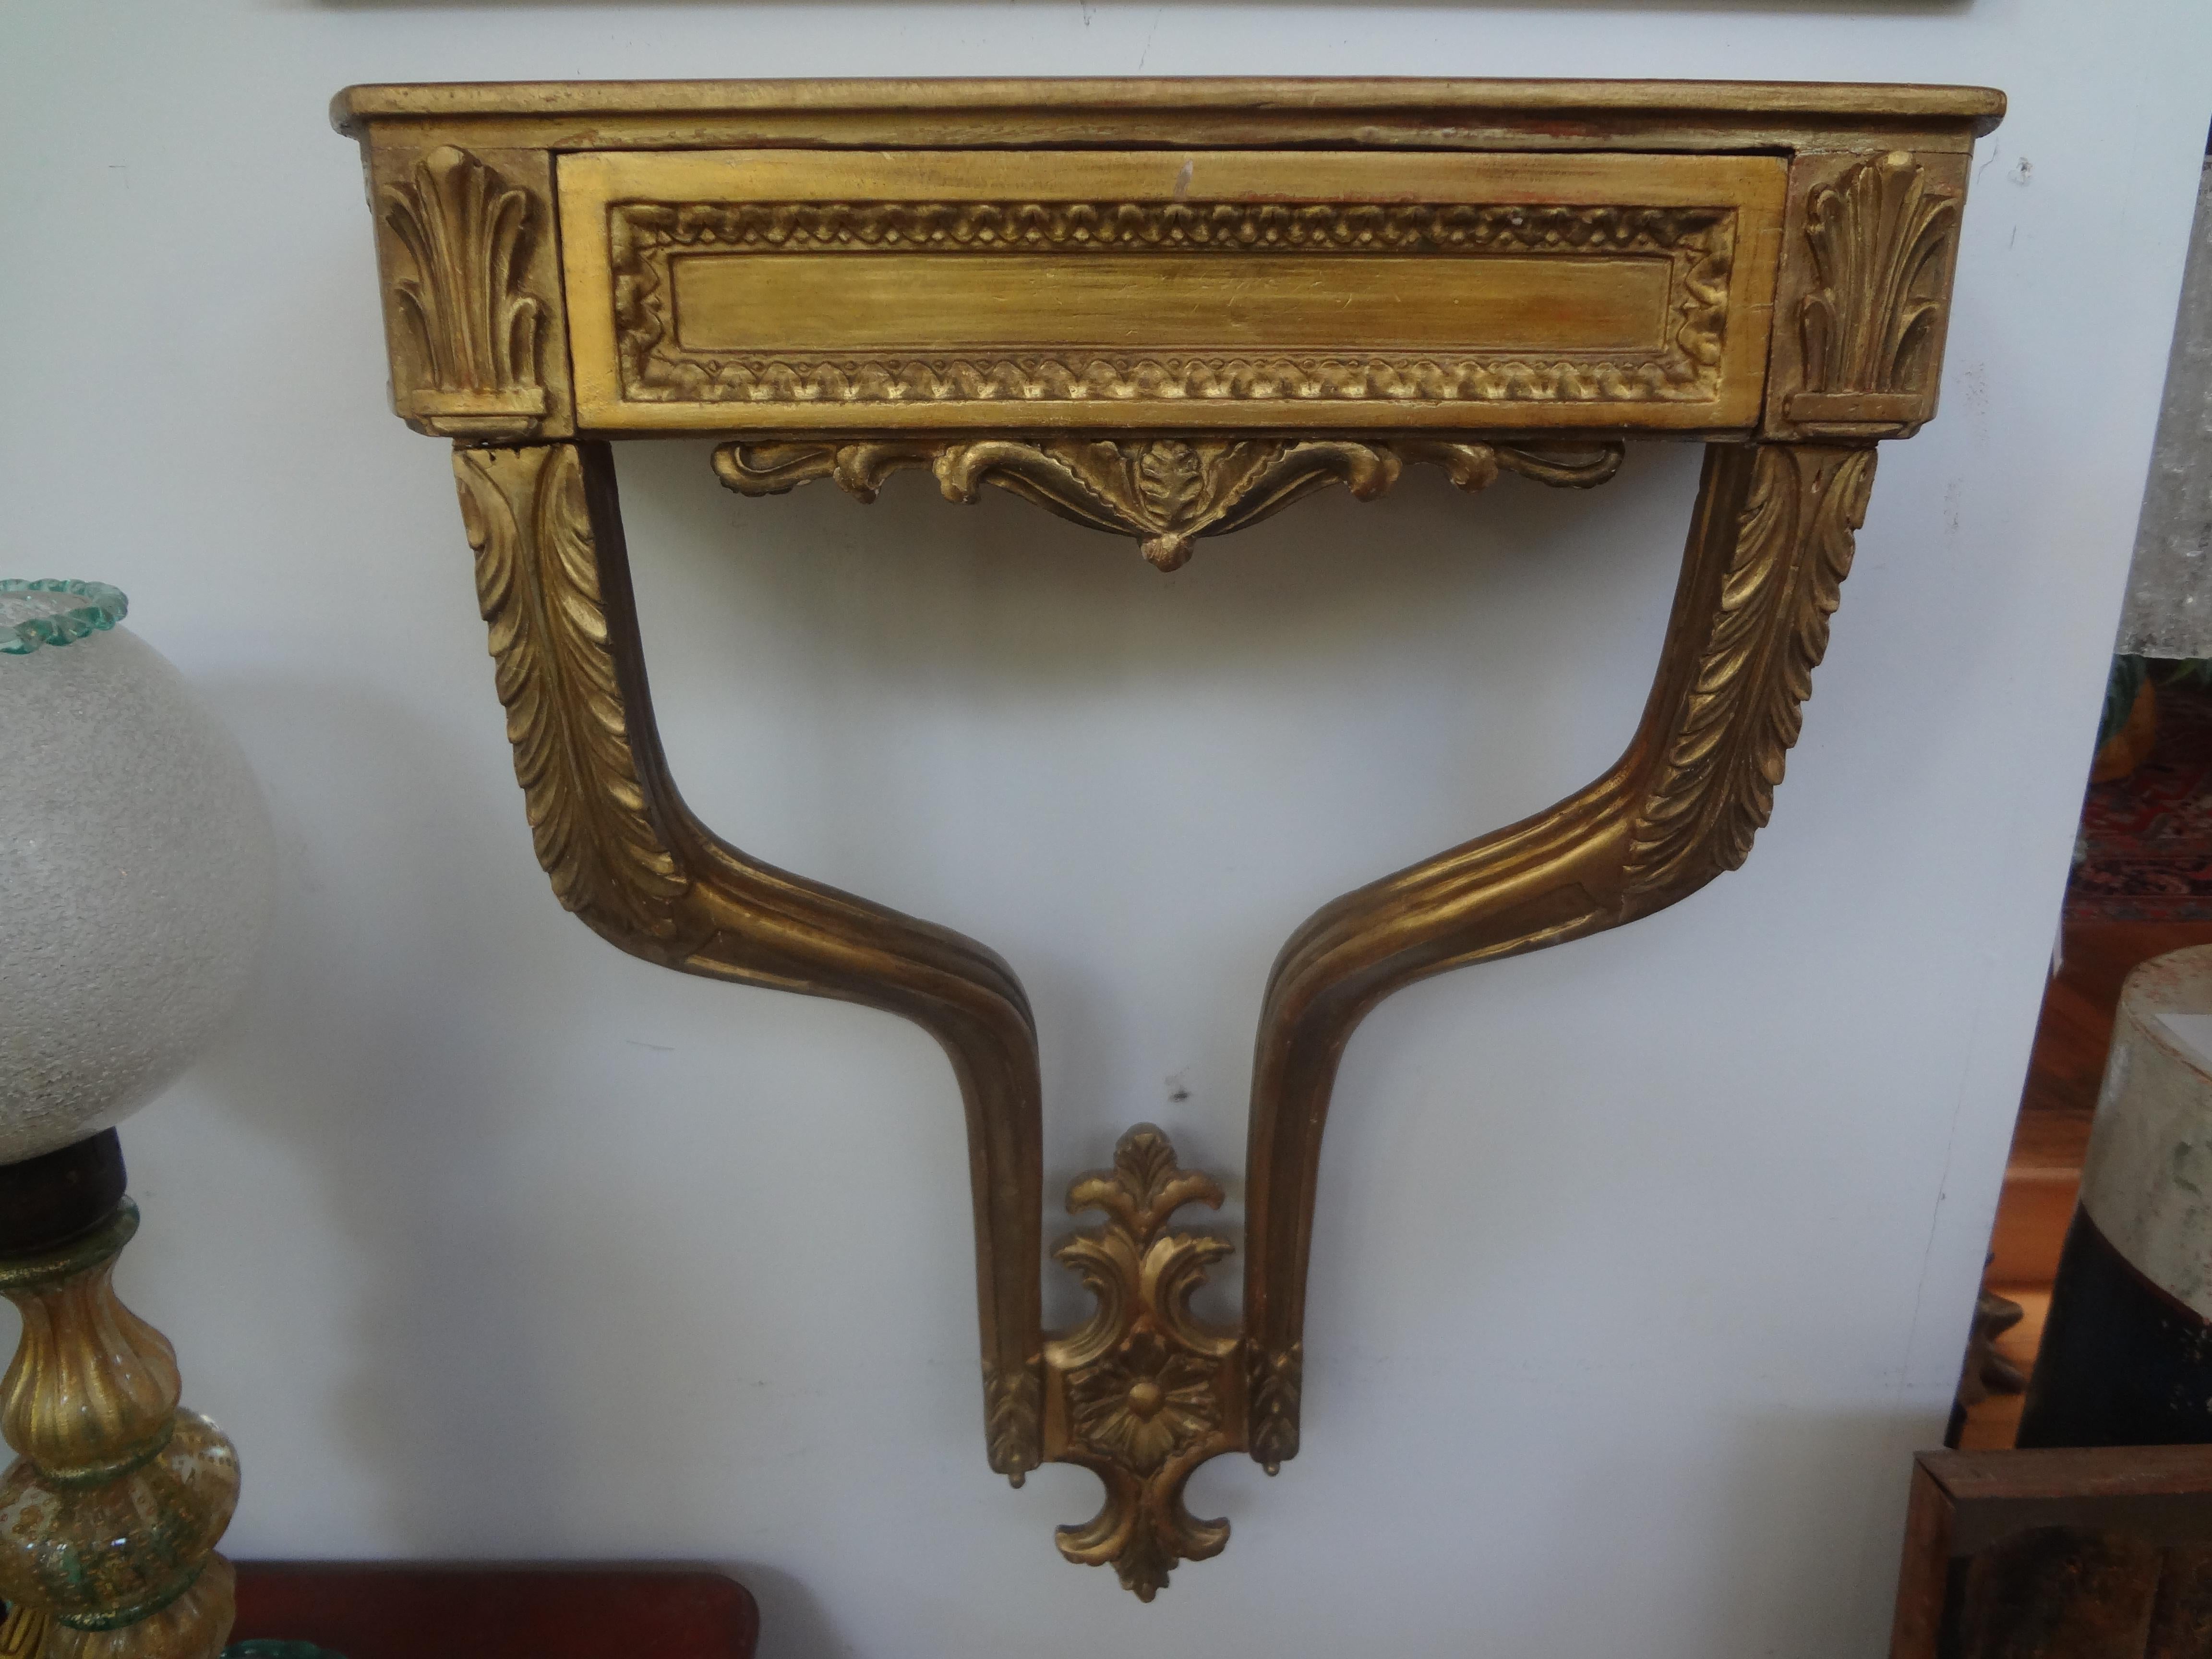 Large Pair of Italian Louis XVI Style giltwood wall brackets.
Large pair of Italian Louis XVI style giltwood wall brackets or wall consoles. This lovely pair of Italian giltwood wall brackets have a large surface area to accommodate prized